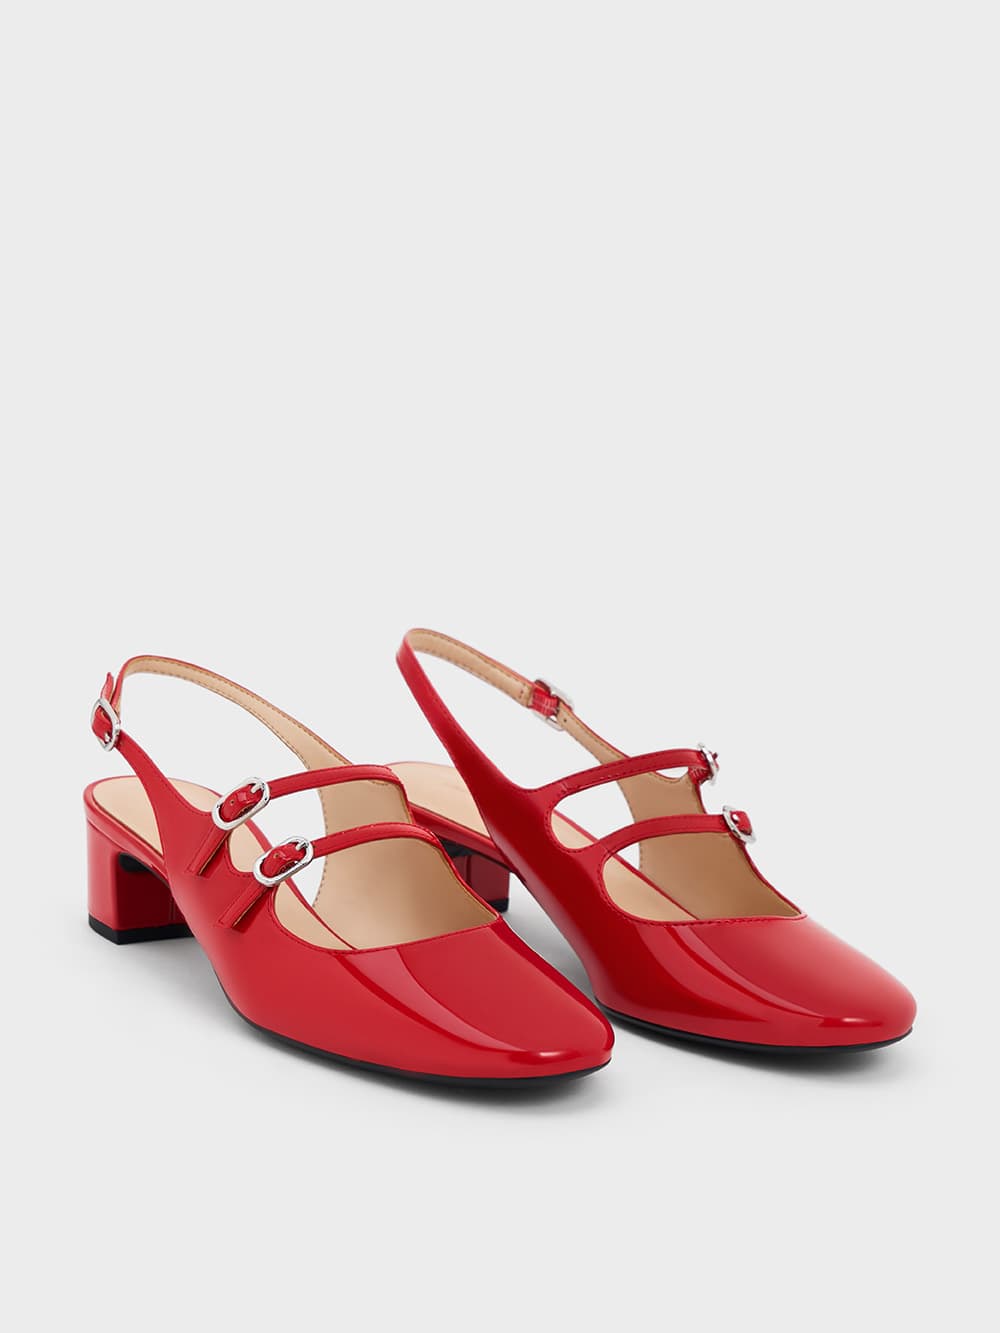 Women’s Red Double-Strap Slingback Mary Jane Pumps - CHARLES & KEITH